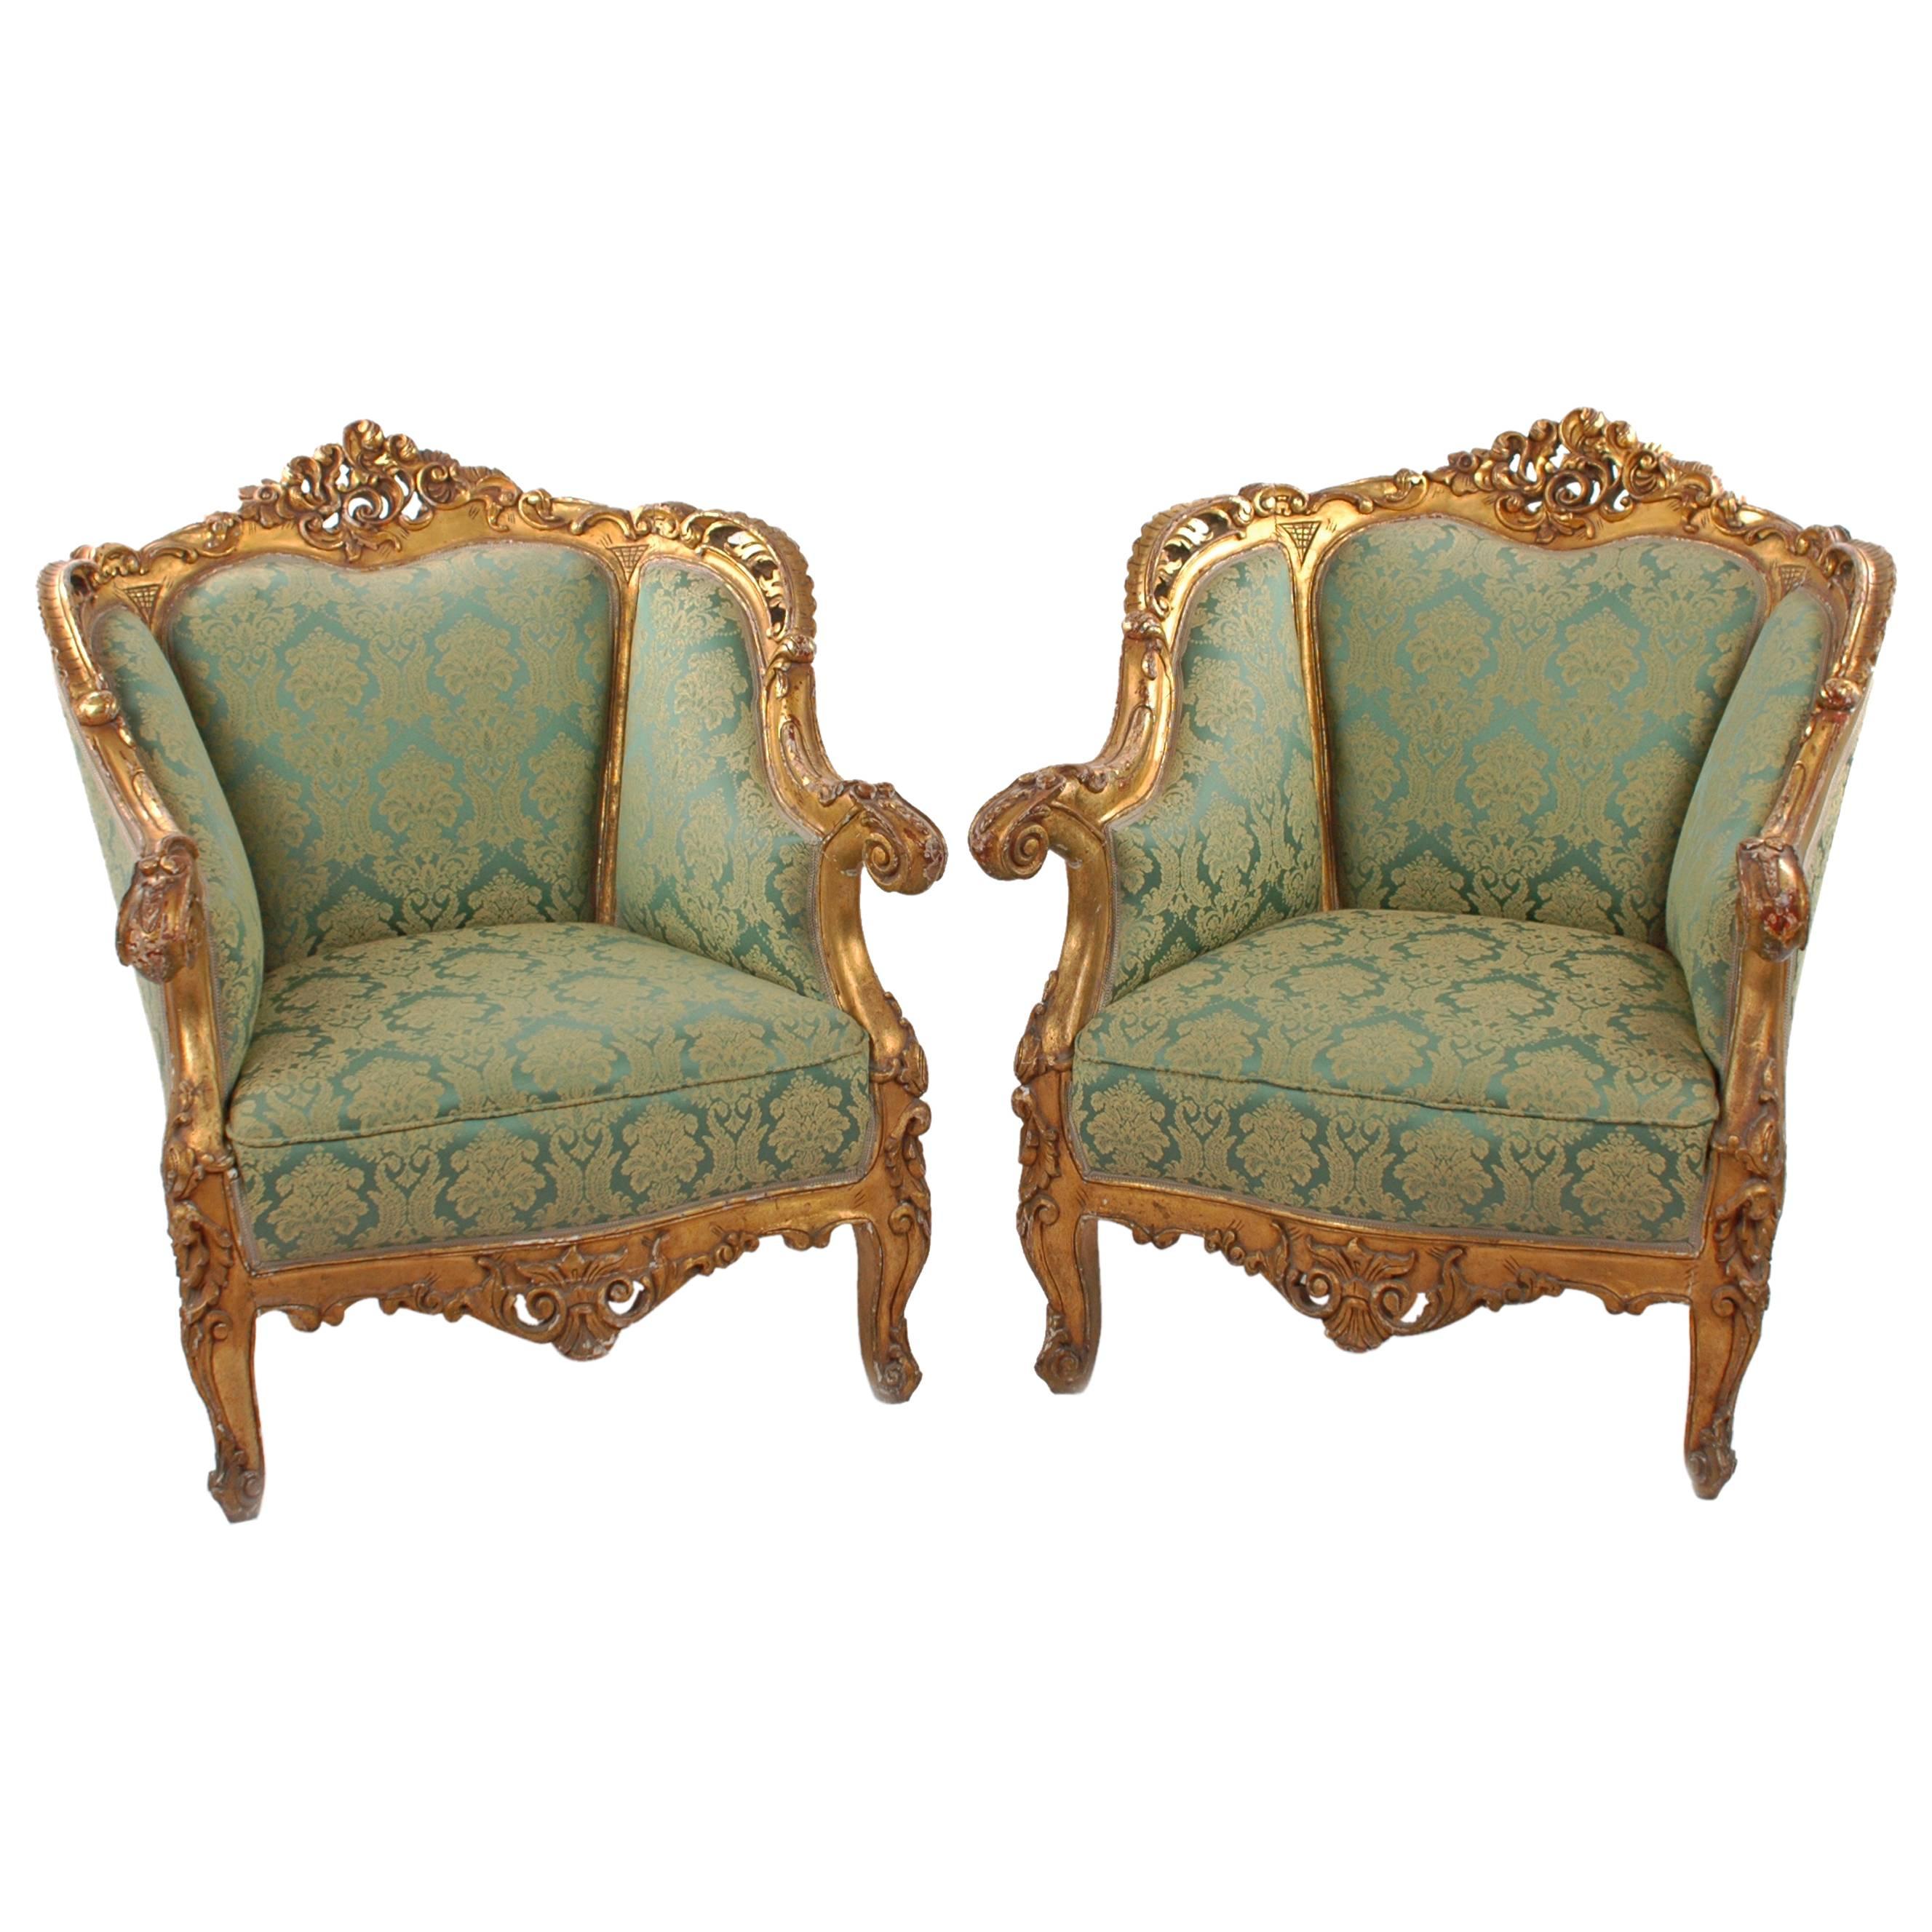 Pair of Mid Century Armchairs, Neo-Rococo, 1850-60, green, gold, Germany